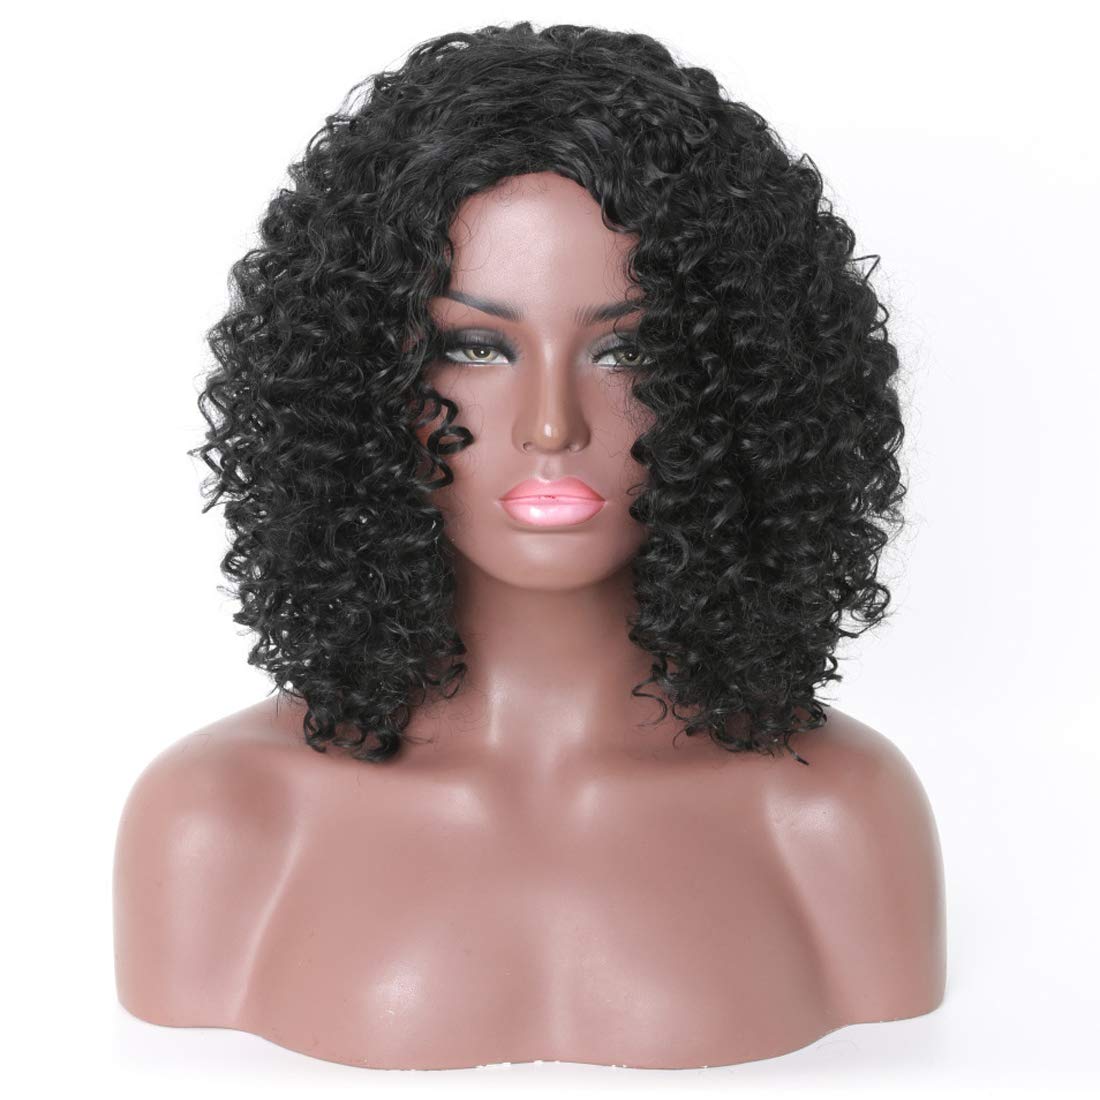 Price:$25.99     AWADUO Short Synthetic Fiber Heat Resistant Fiber Hair Wig Wigs African Curly Wigs For Black Women(Black)   Beauty